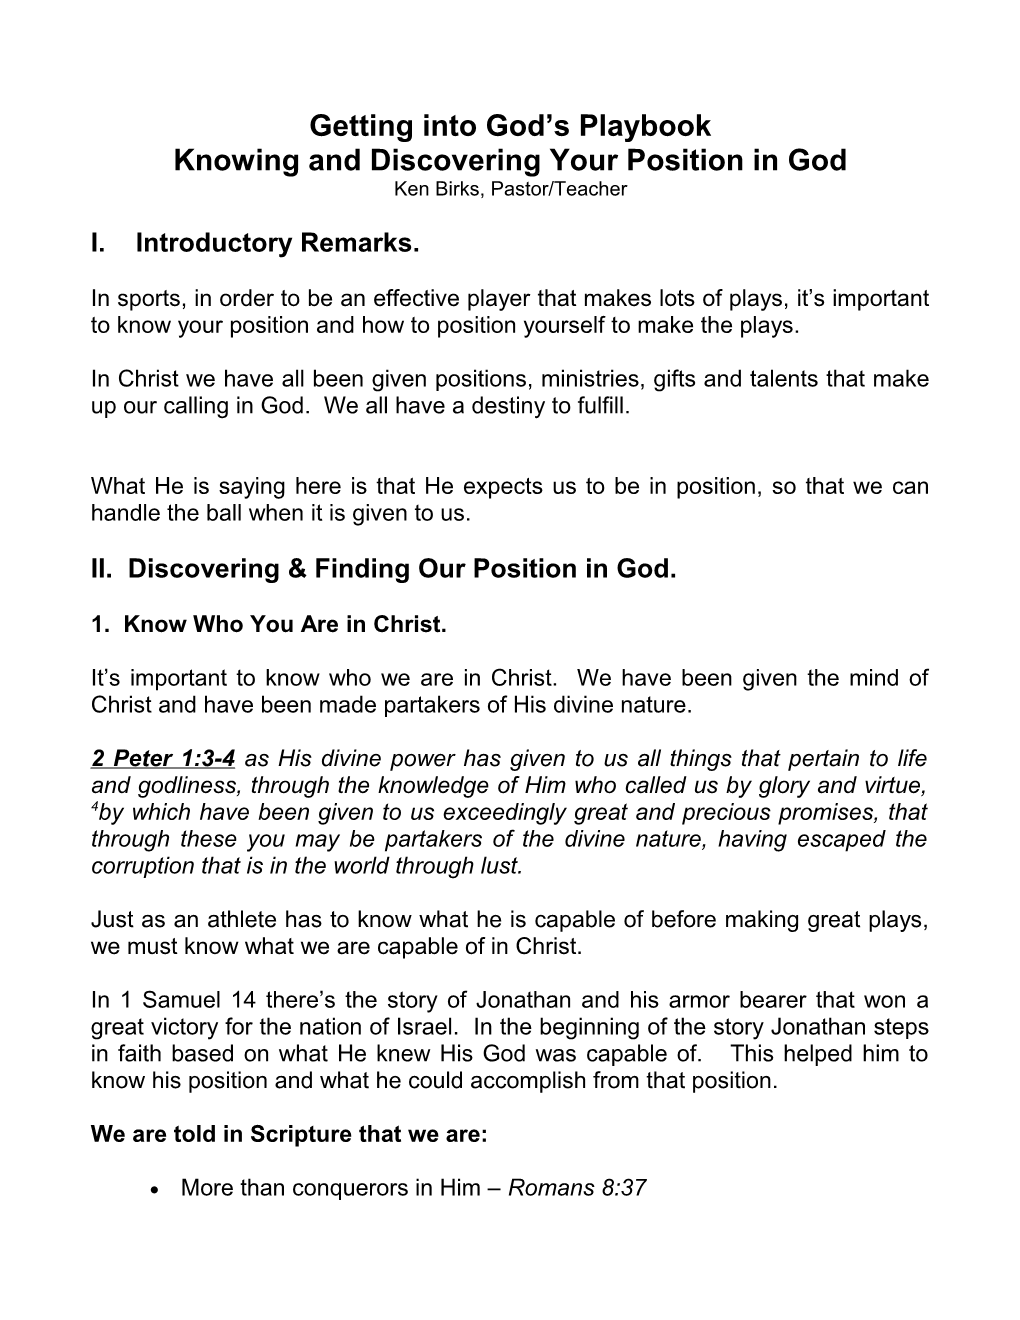 Maintaining Your Positioning in God